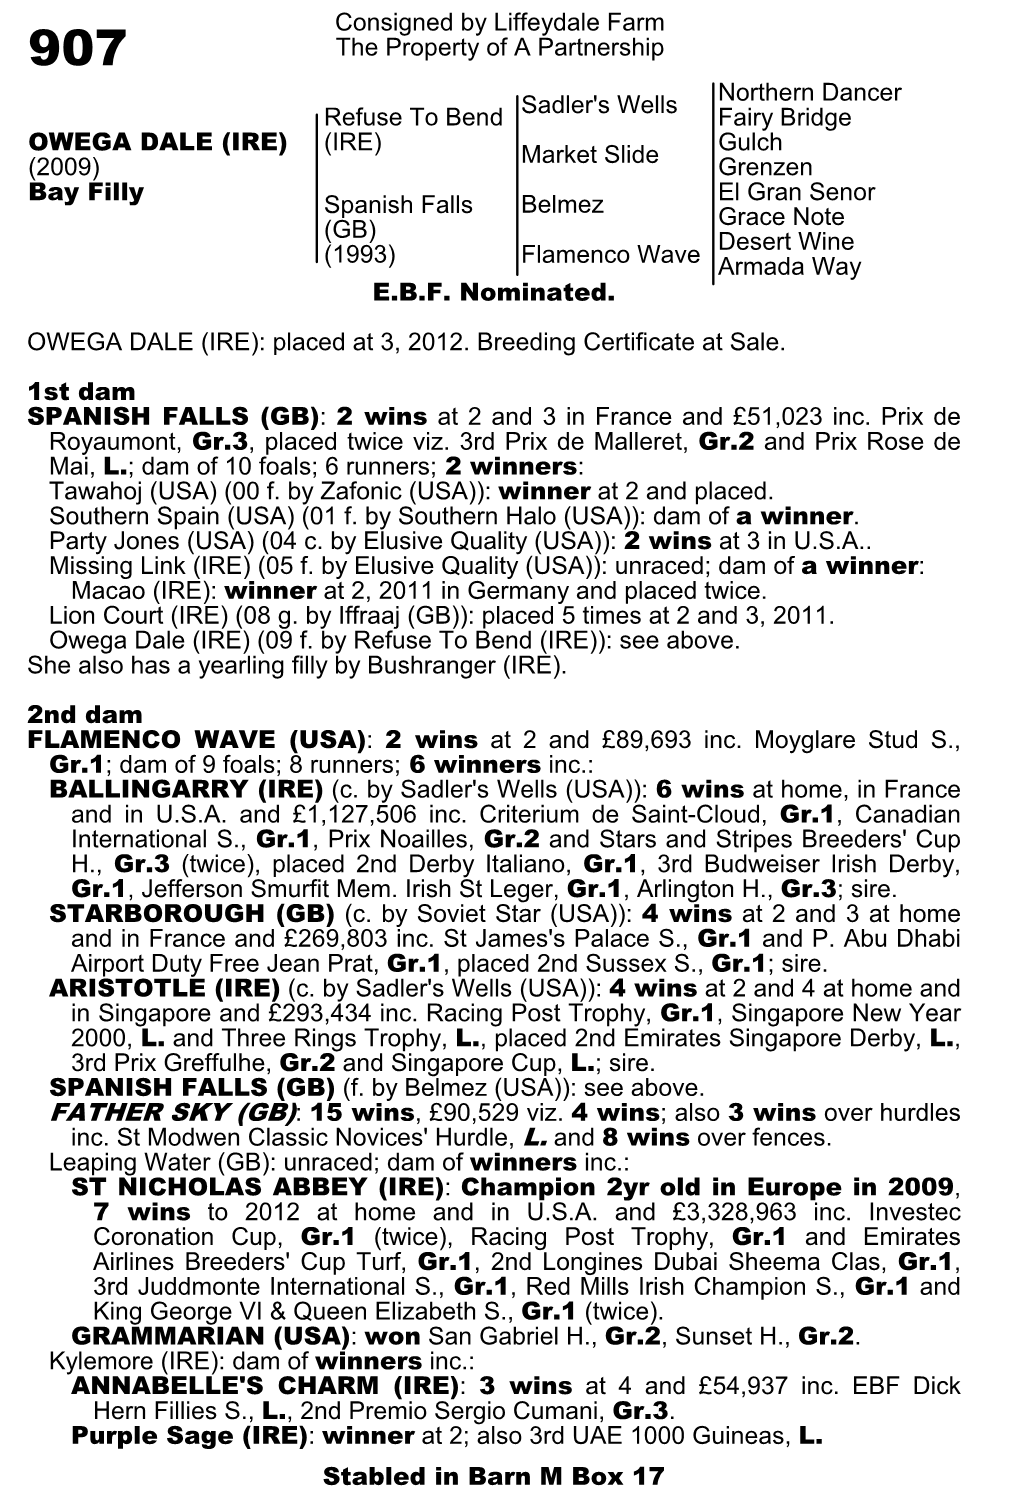 Consigned by Liffeydale Farm the Property of a Partnership Sadler's